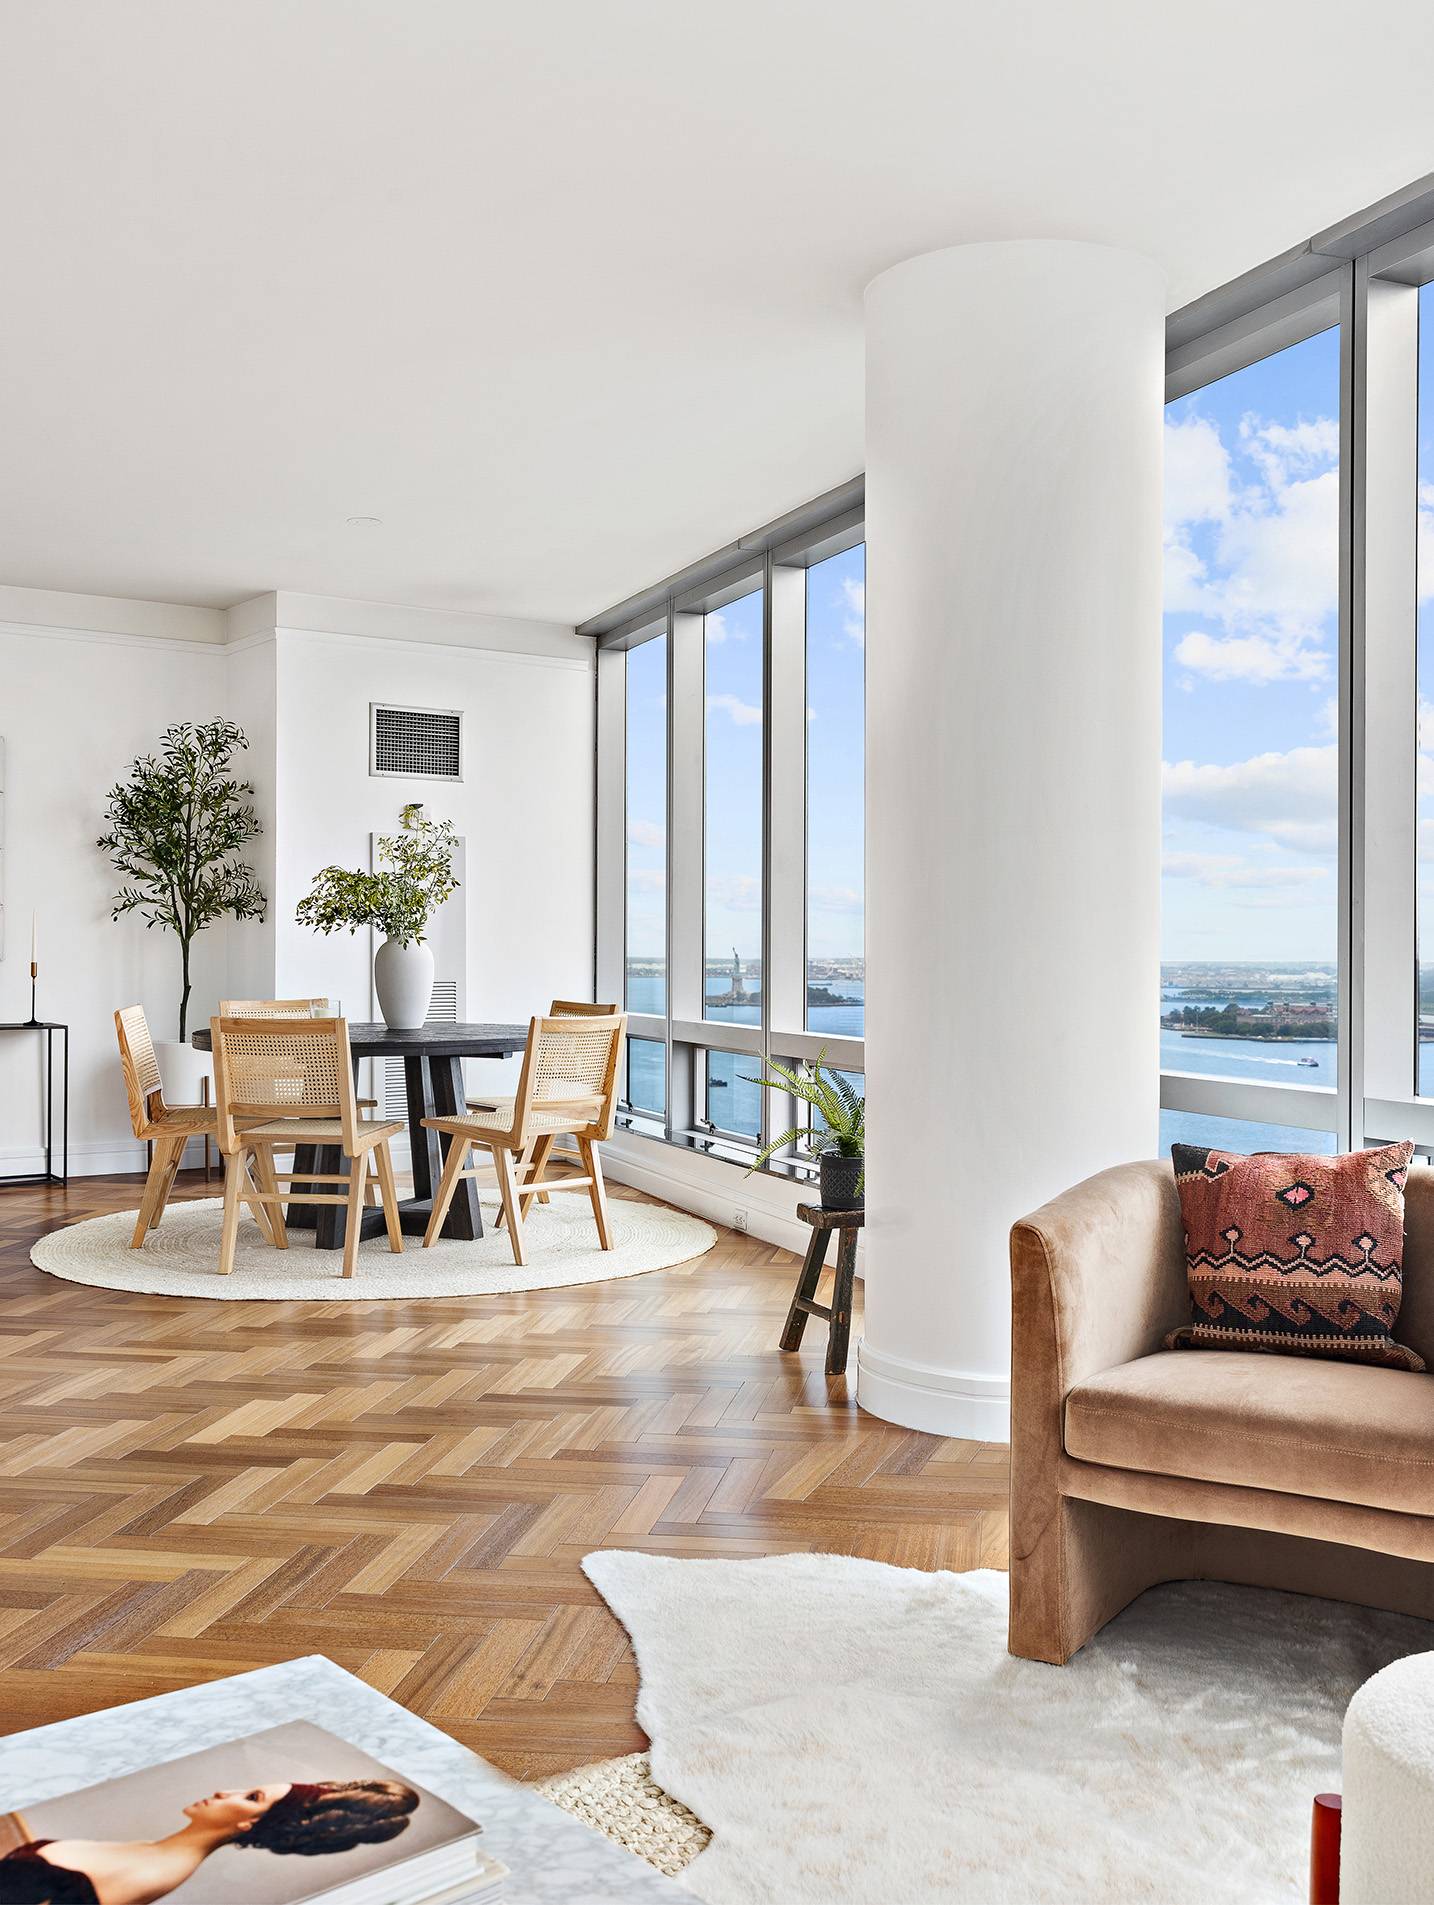 Jaw dropping Hudson River views become your daily backdrop in this stunning and rare A line two bedroom, two and a half bathroom high floor home at the elegant Ritz ...